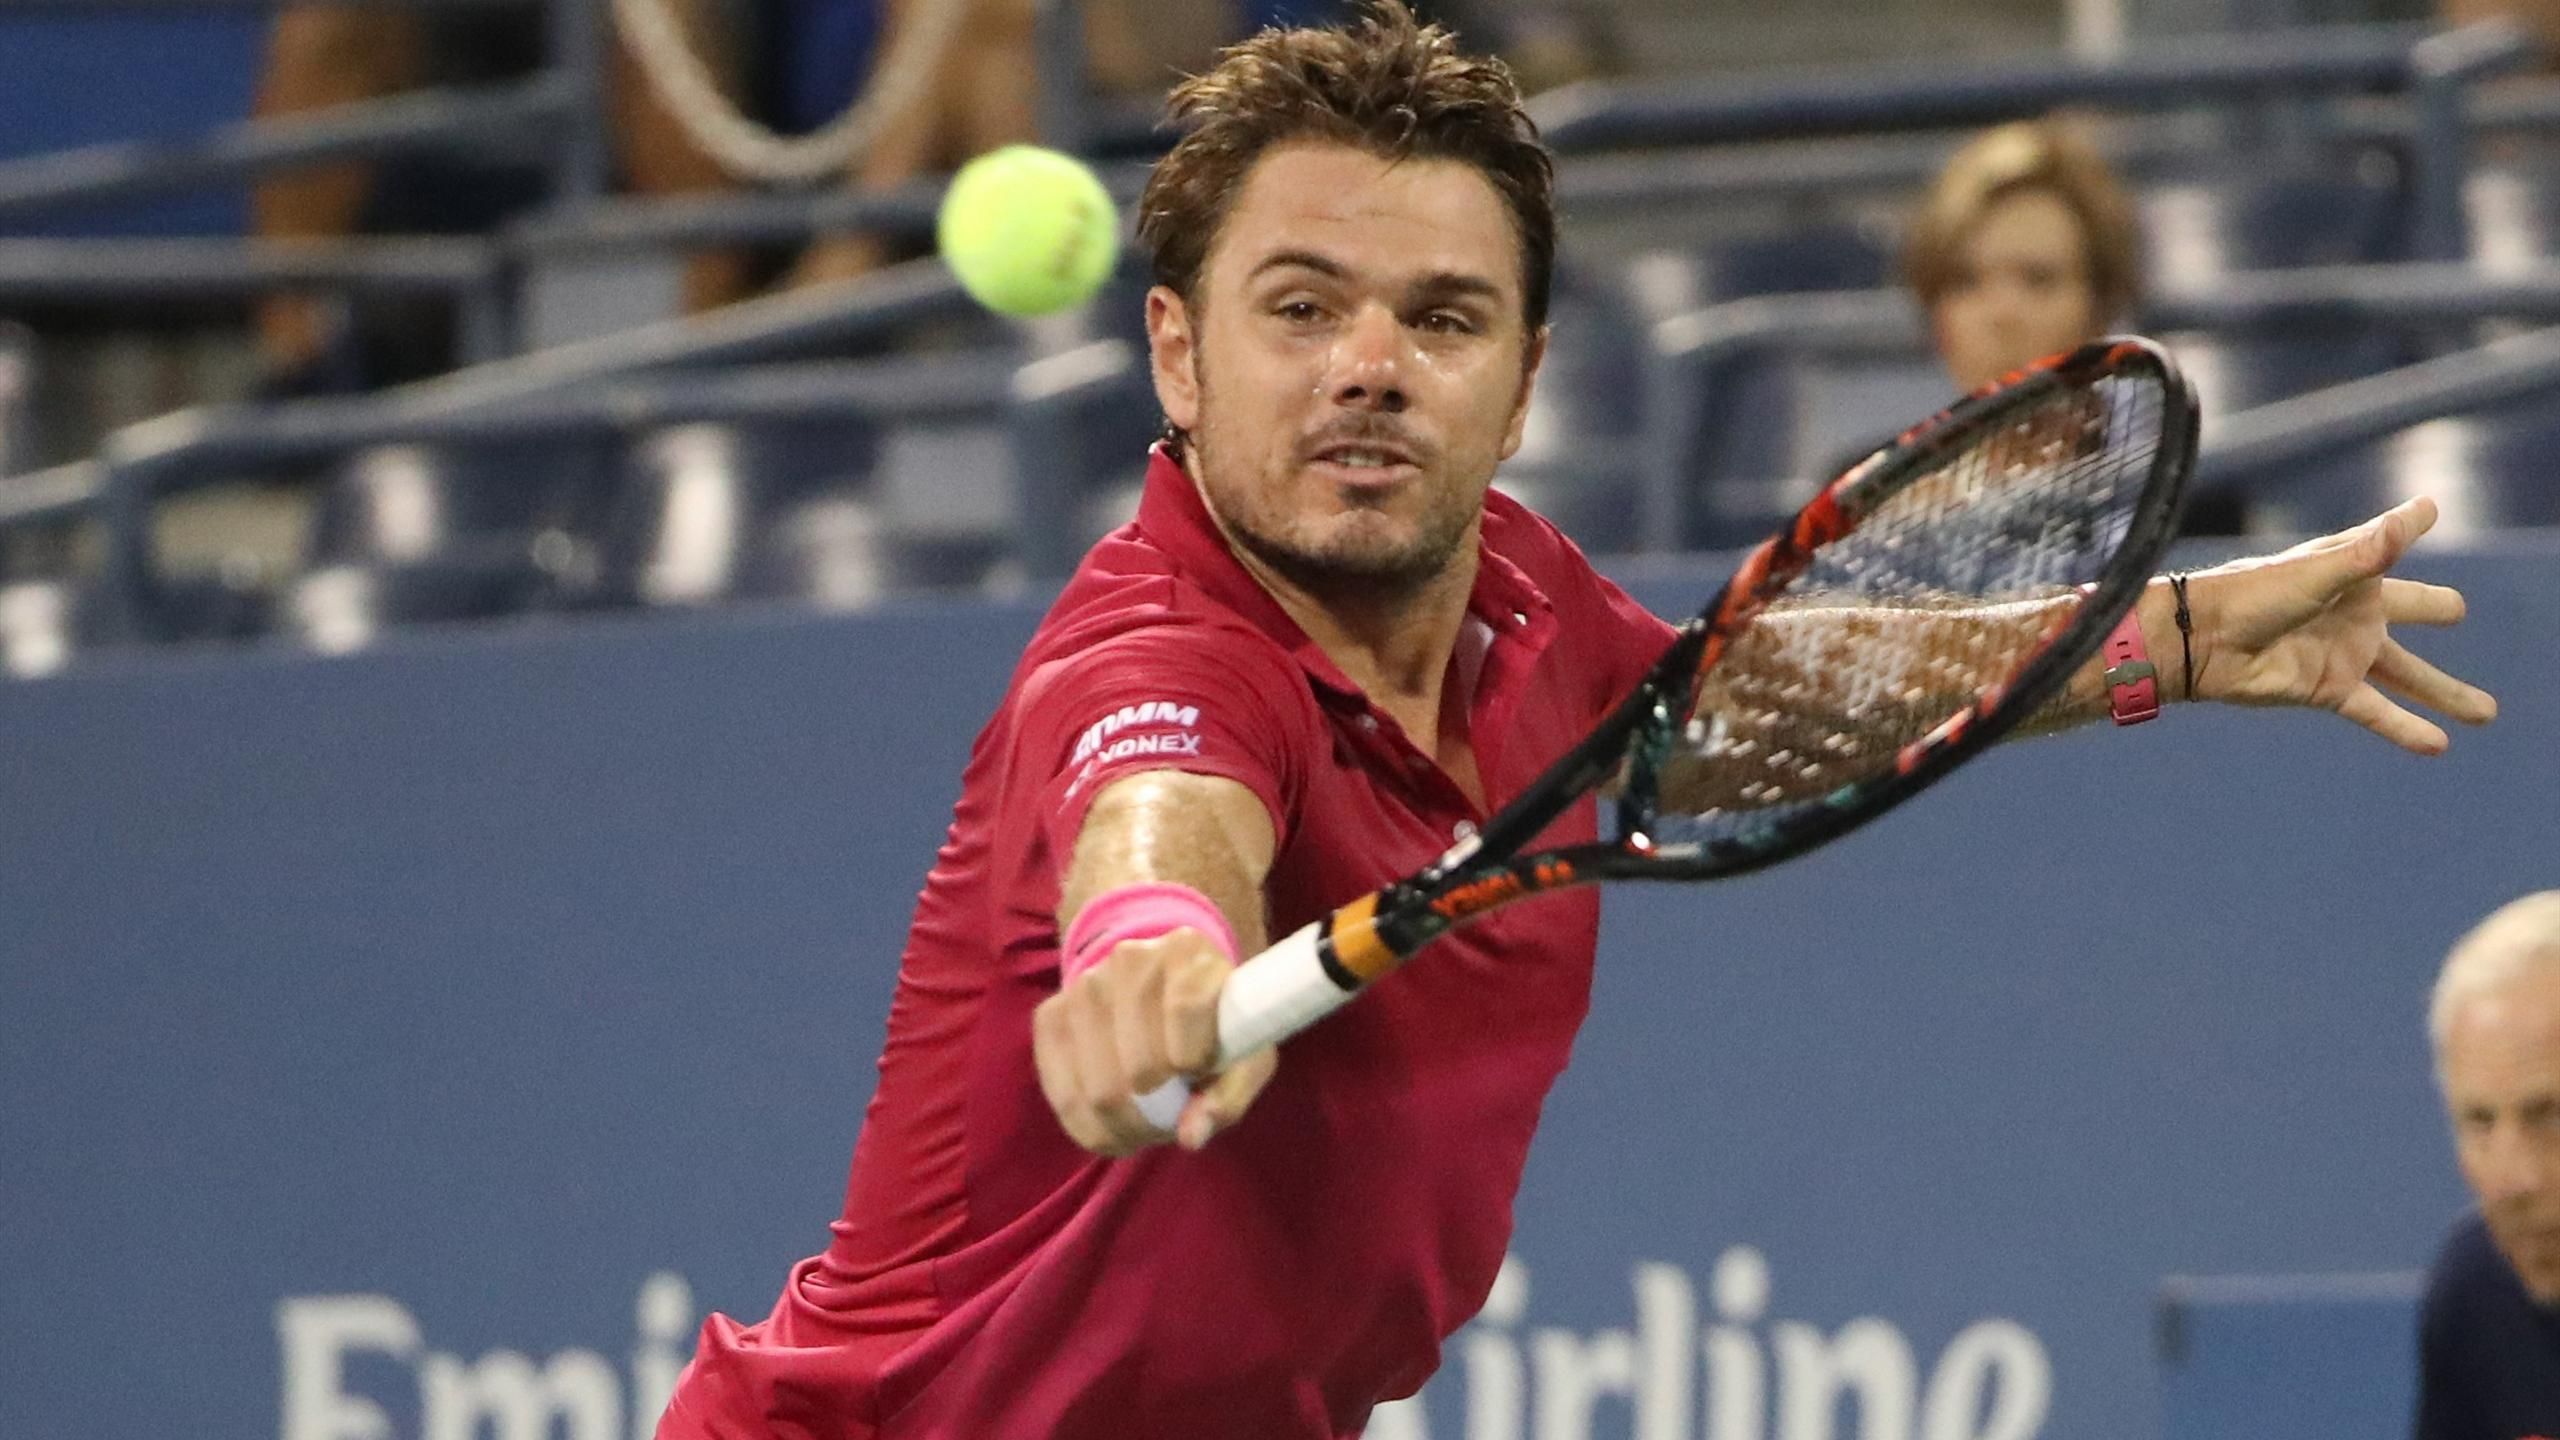 Stan Wawrinka proves too good for Italian Alessandro Giannessi at US Open